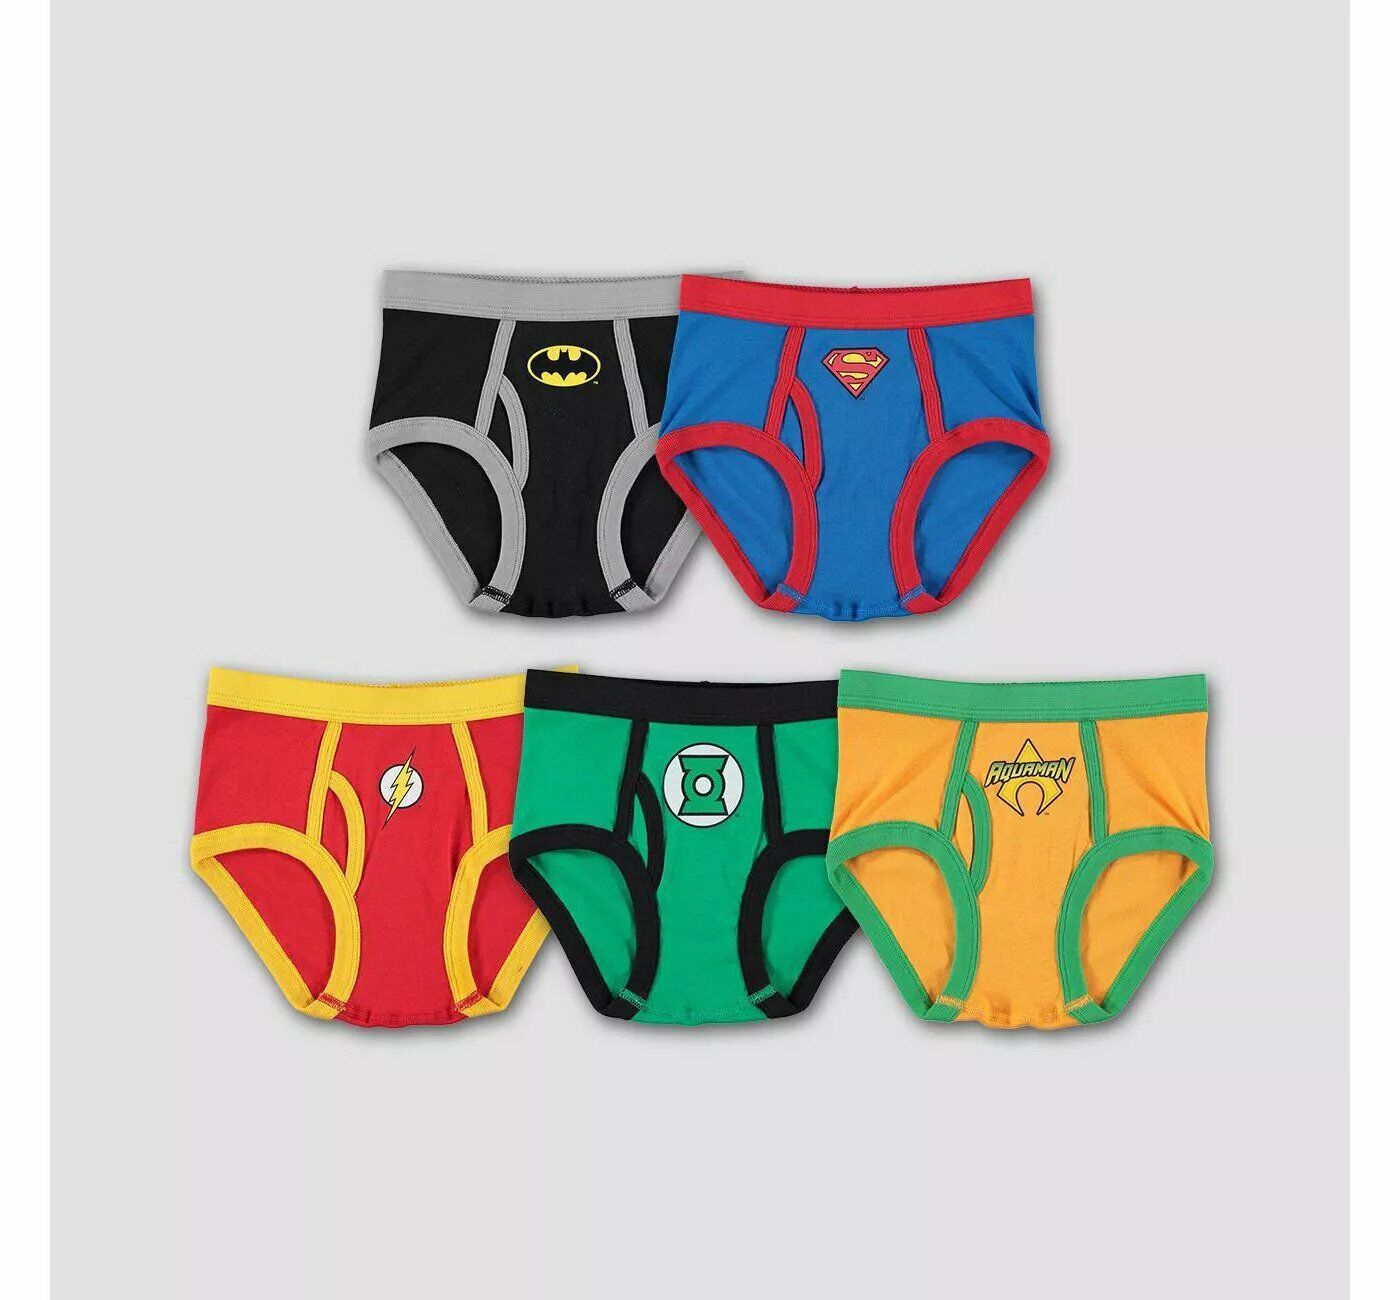 DC Pj Mask Justice League Mix Pack of 5 Underwear 12213, MamasLittle